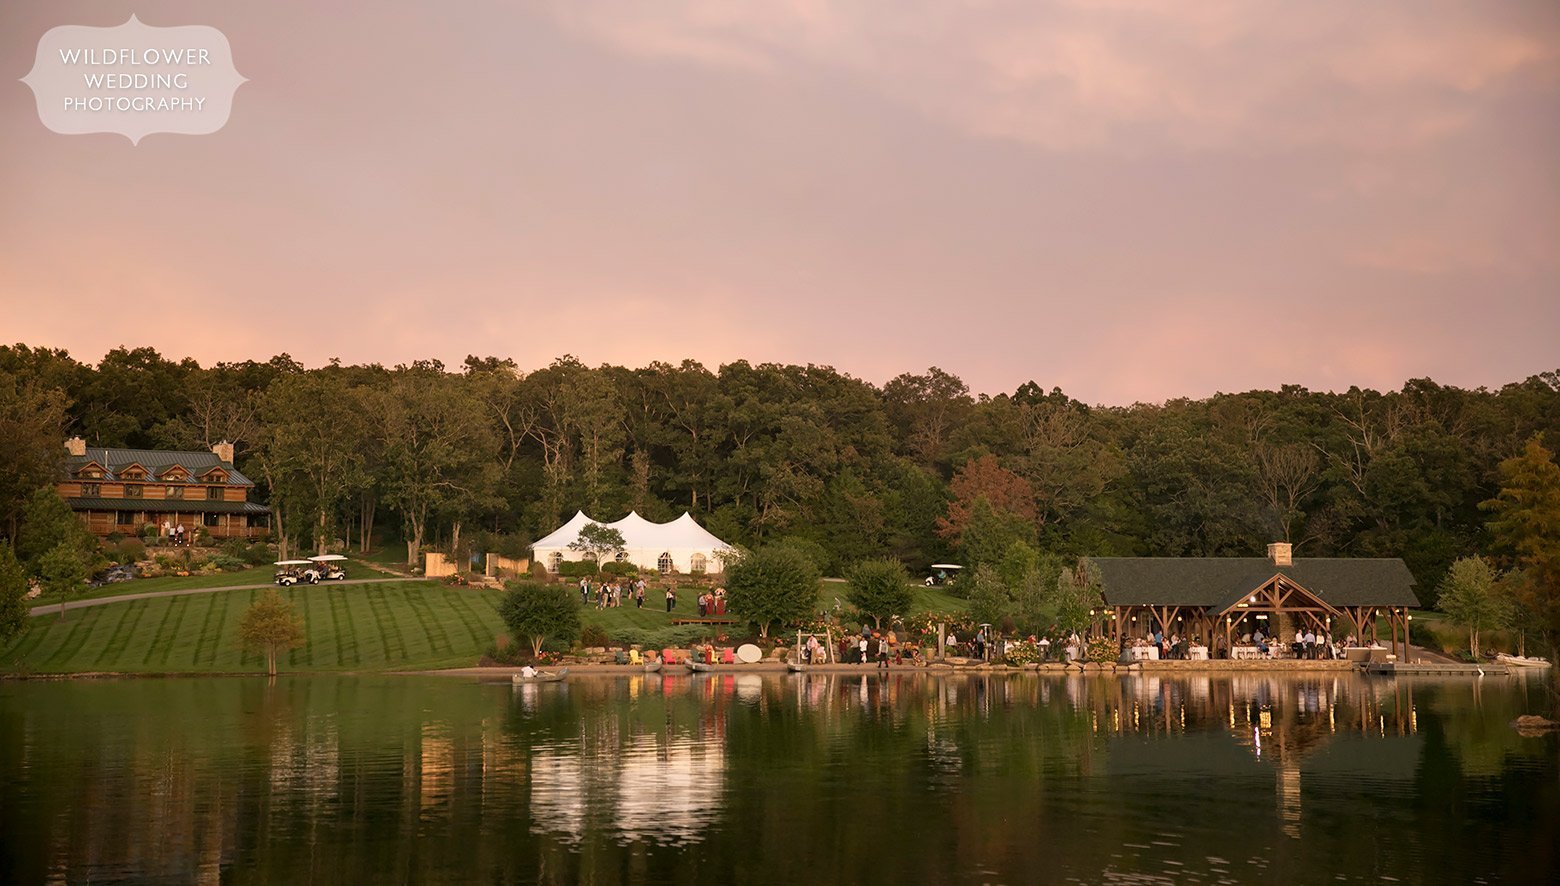 Outdoor lodge wedding in Hermann, MO with tented reception.